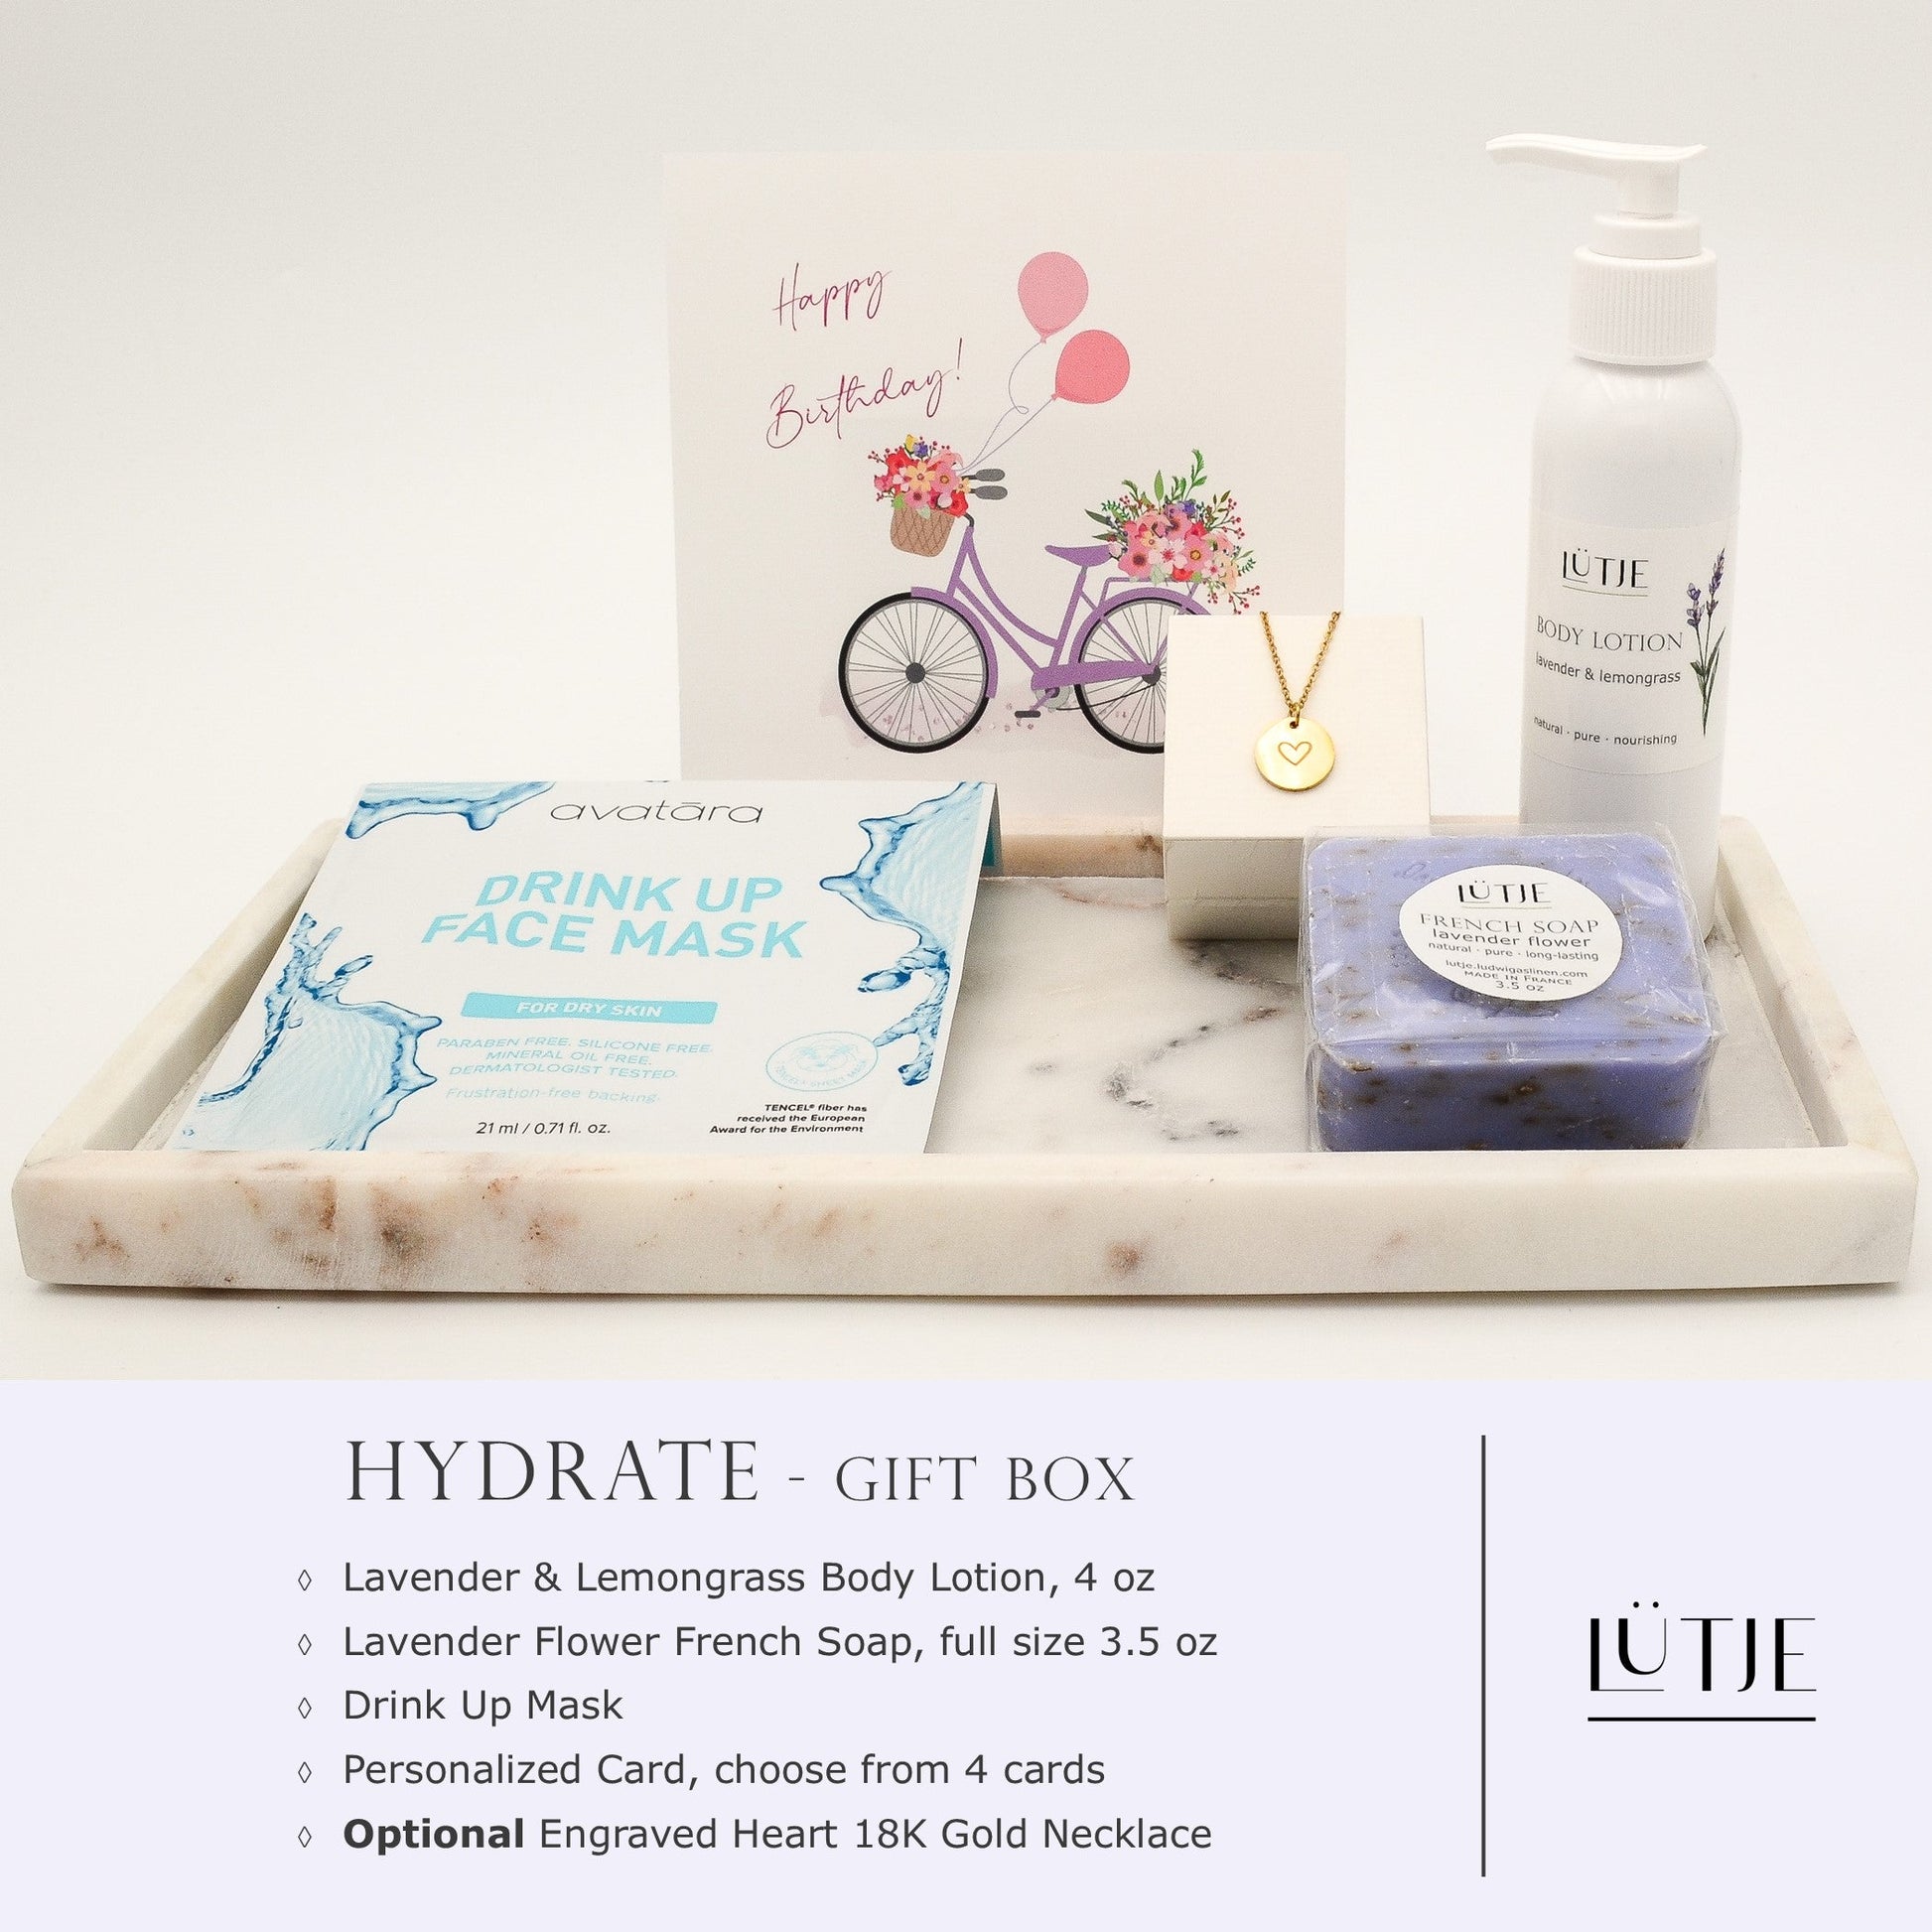 Hydrate Gift Box for women, daughter, mom, BFF, wife, sister or grandma, includes Lavender & Lemongrass body lotion, French soap, hydrating face mask, and optional 18K gold-plated necklace with engraved heart.